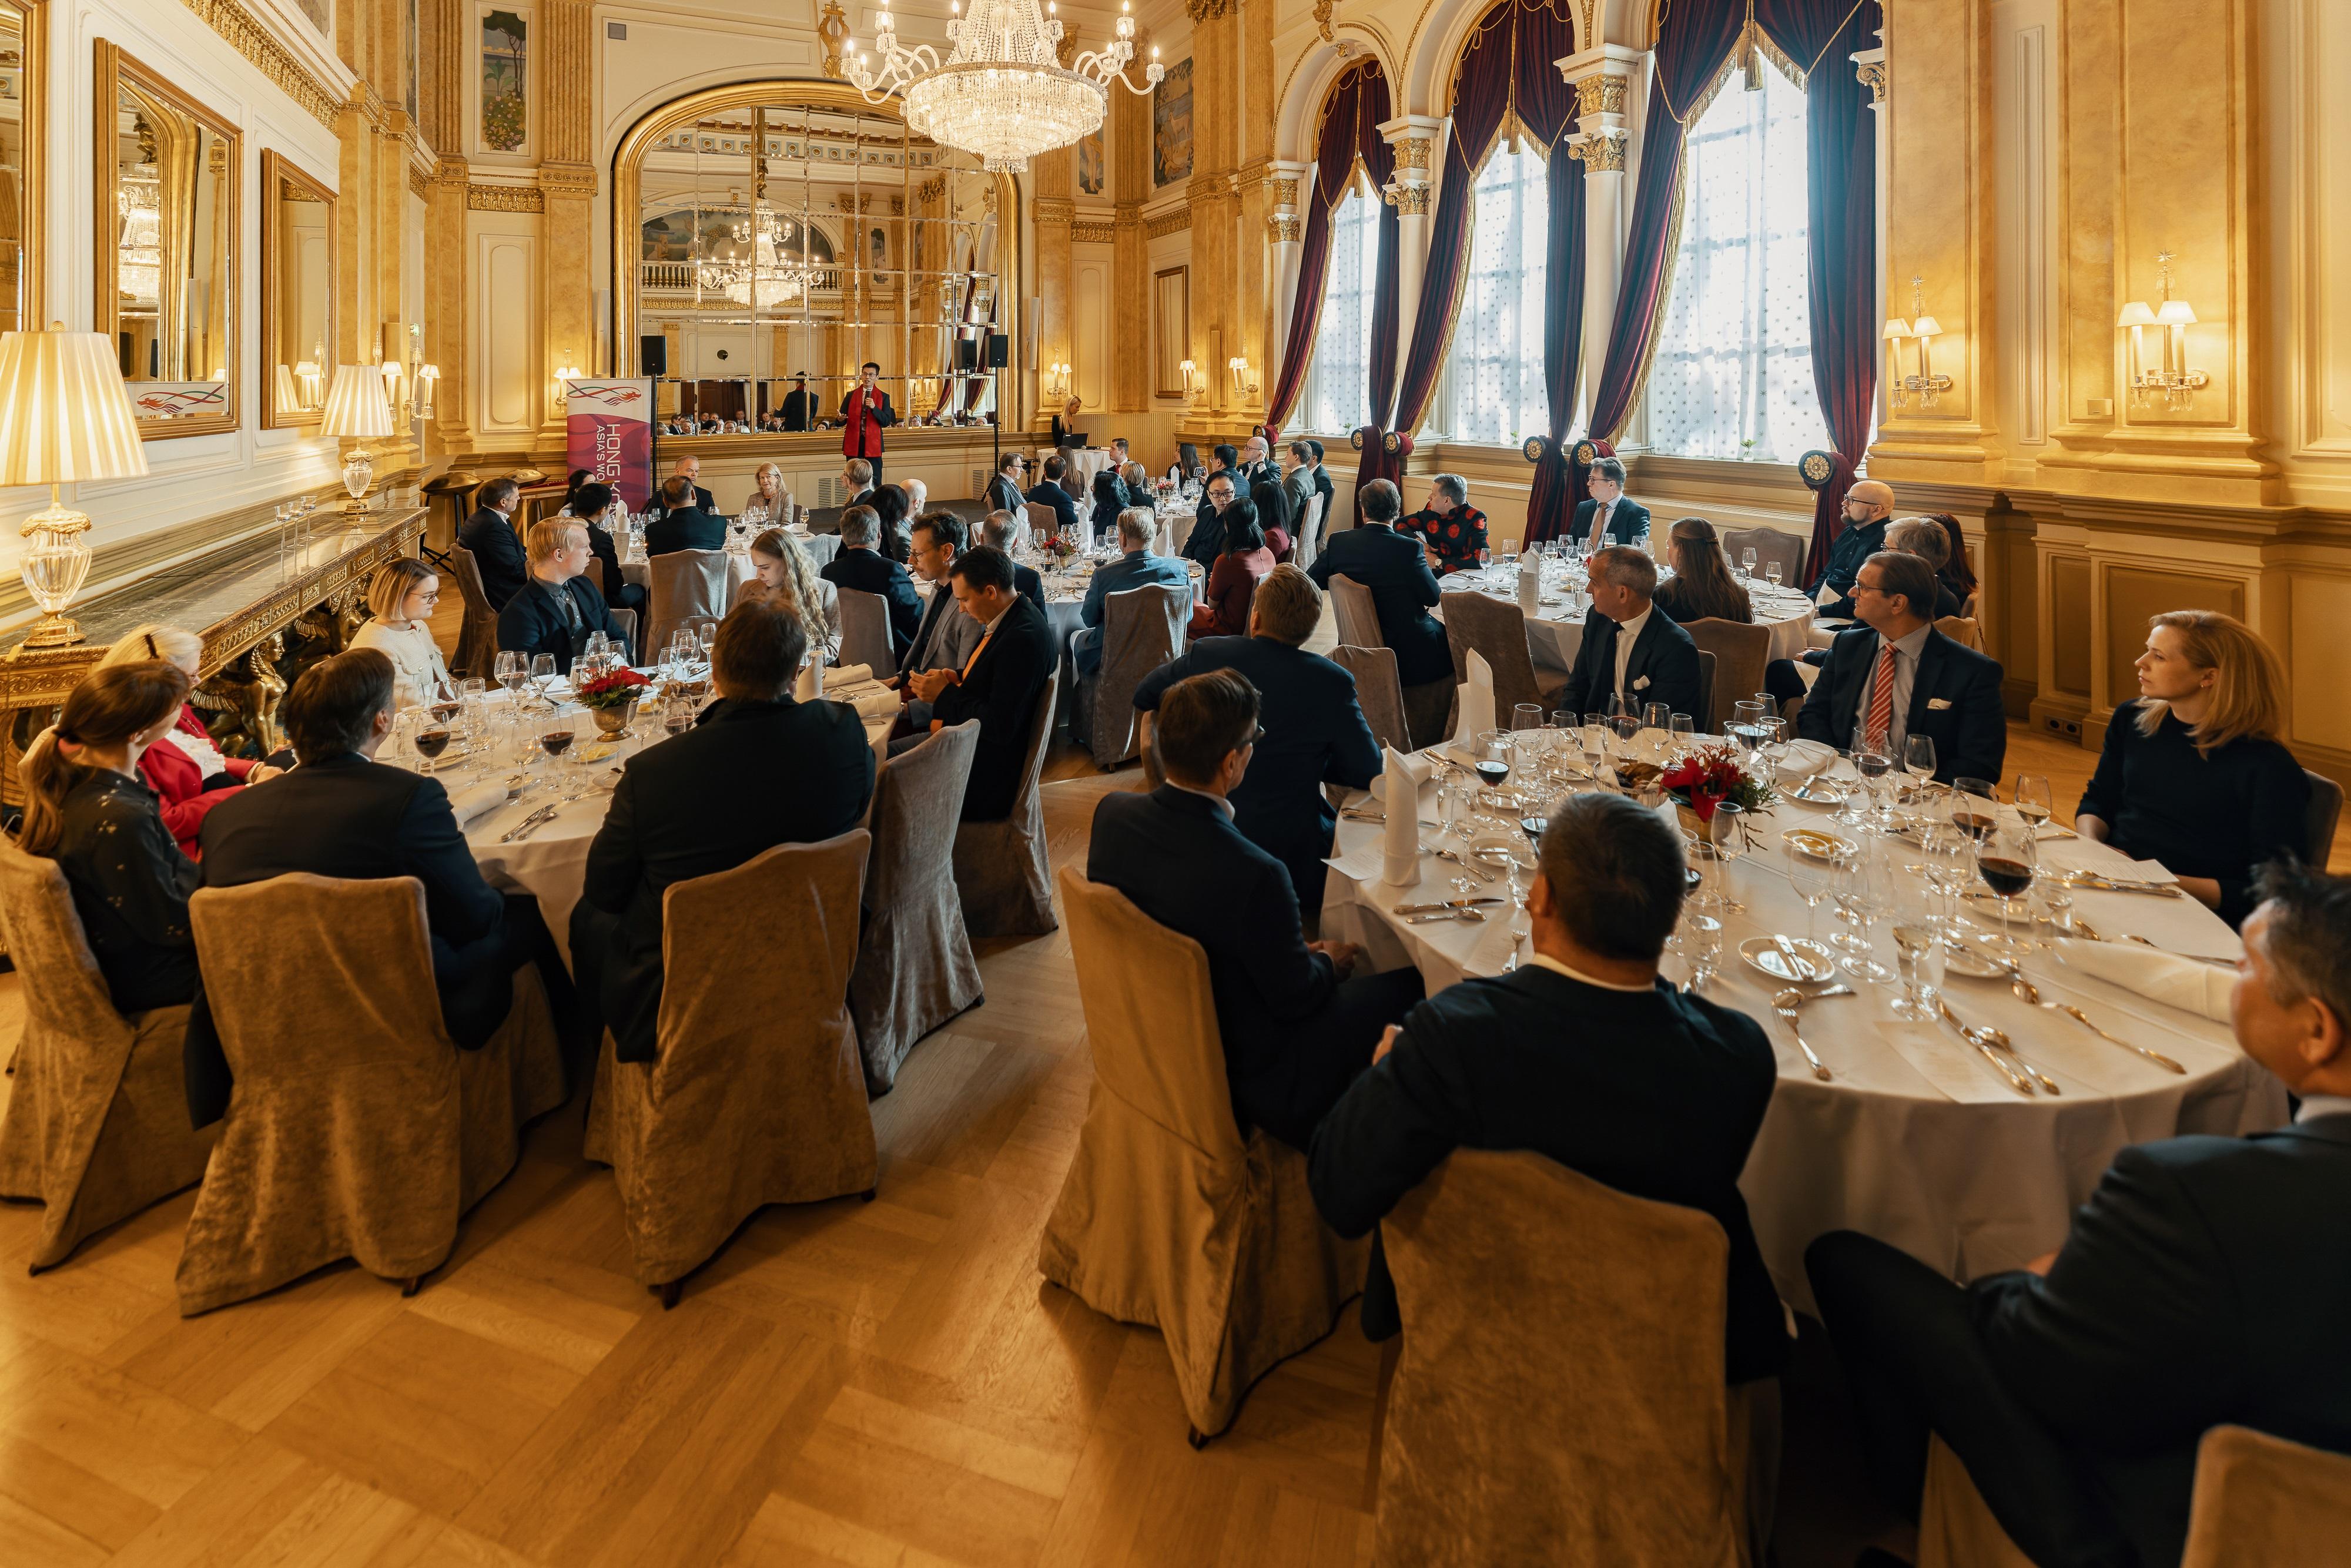 The Hong Kong Economic and Trade Office, London and the Finland-Hong Kong Business Association co-hosted a Year of the Dragon lunch reception in Helsinki, Finland, on March 5 (Helsinki time). The reception was well attended by guests from the local business, academic and cultural sectors.